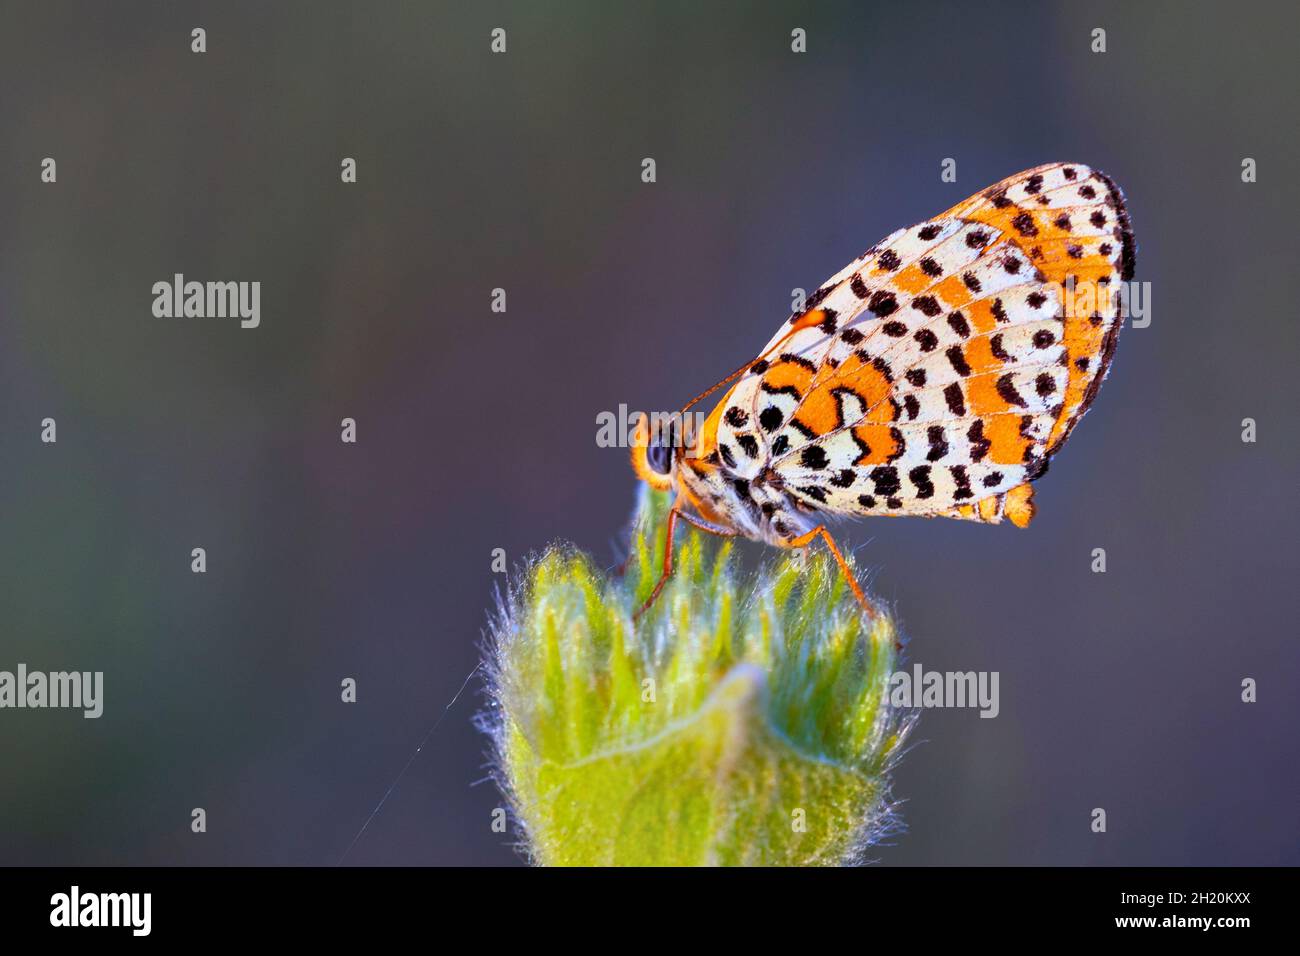 Day butterfly perched on flower, Melitaea aetherie Stock Photo